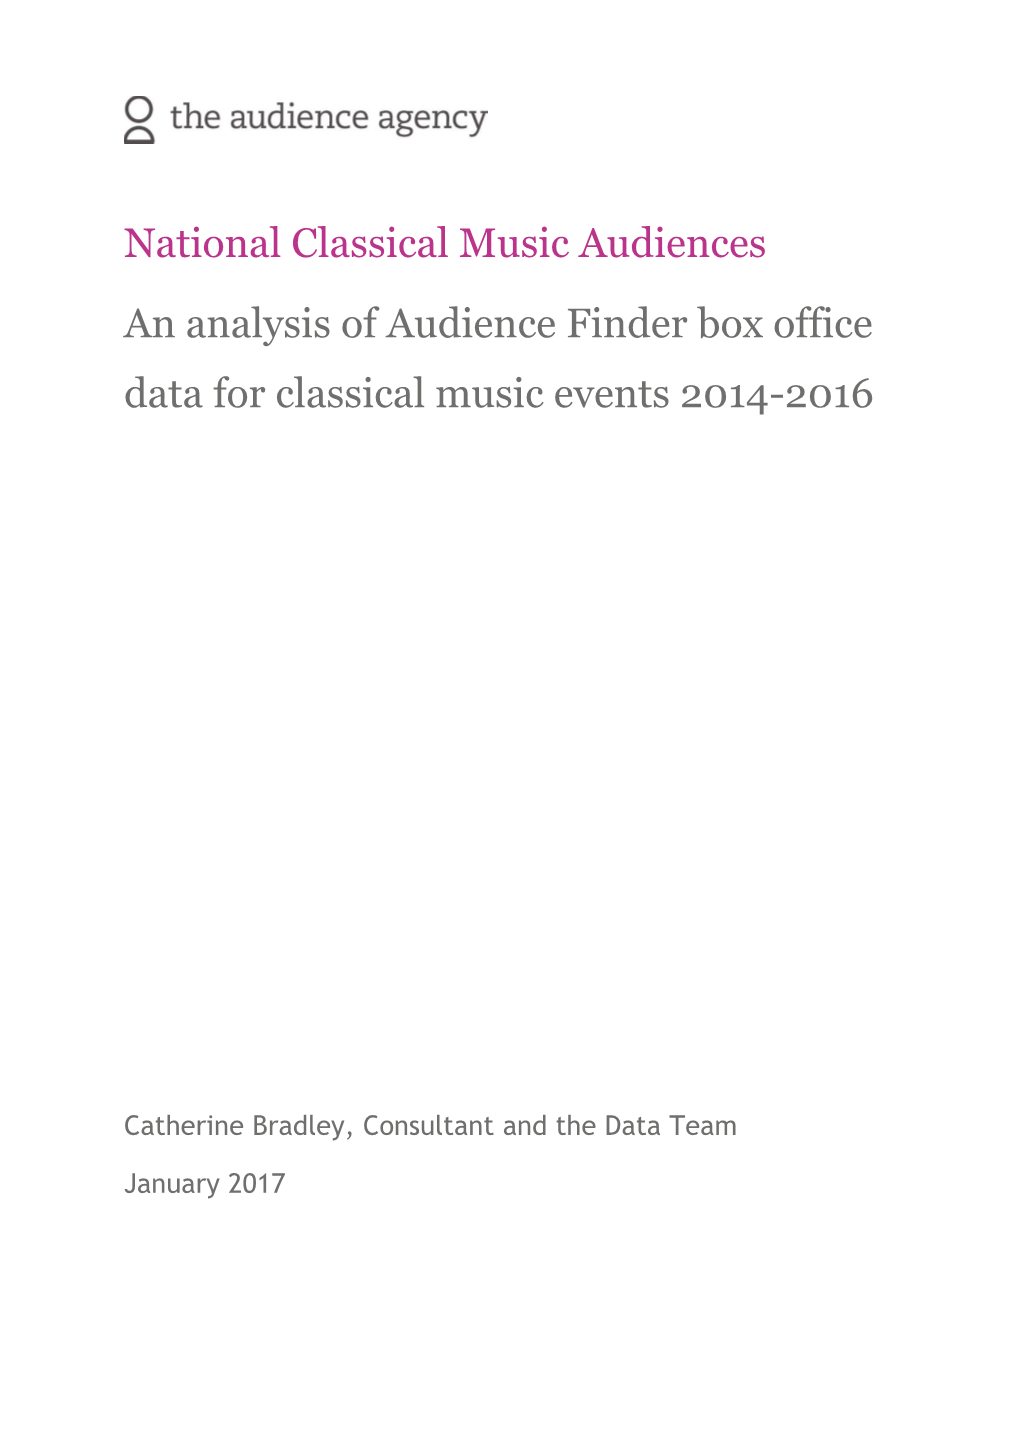 National Classical Music Audiences an Analysis of Audience Finder Box Office Data for Classical Music Events 2014-2016